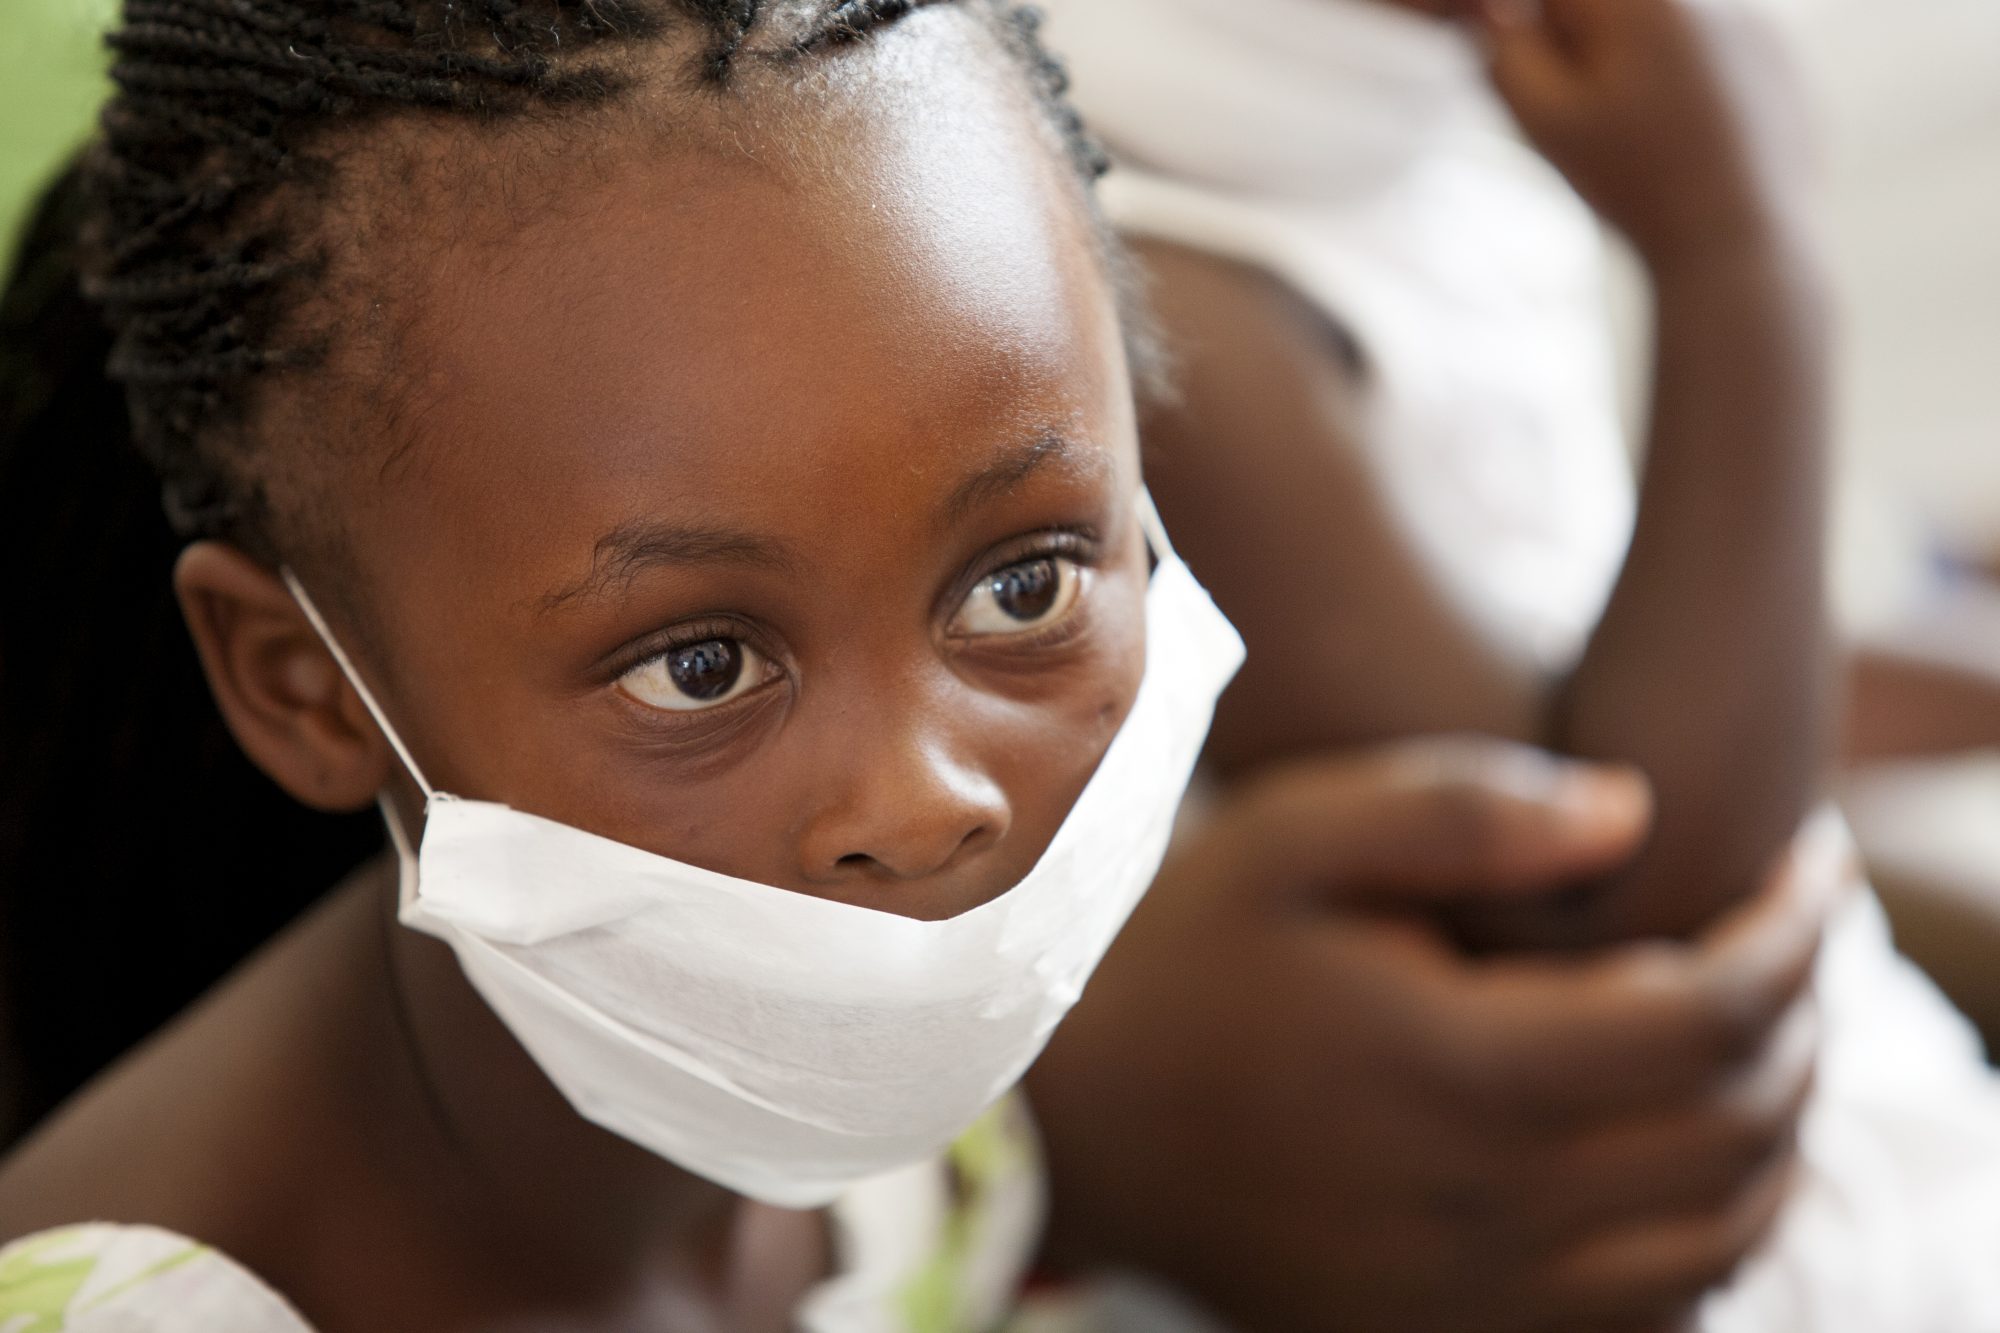 wearing a surgical mask, awaiting treatment for her mother for tuberculosis at a local clinic.